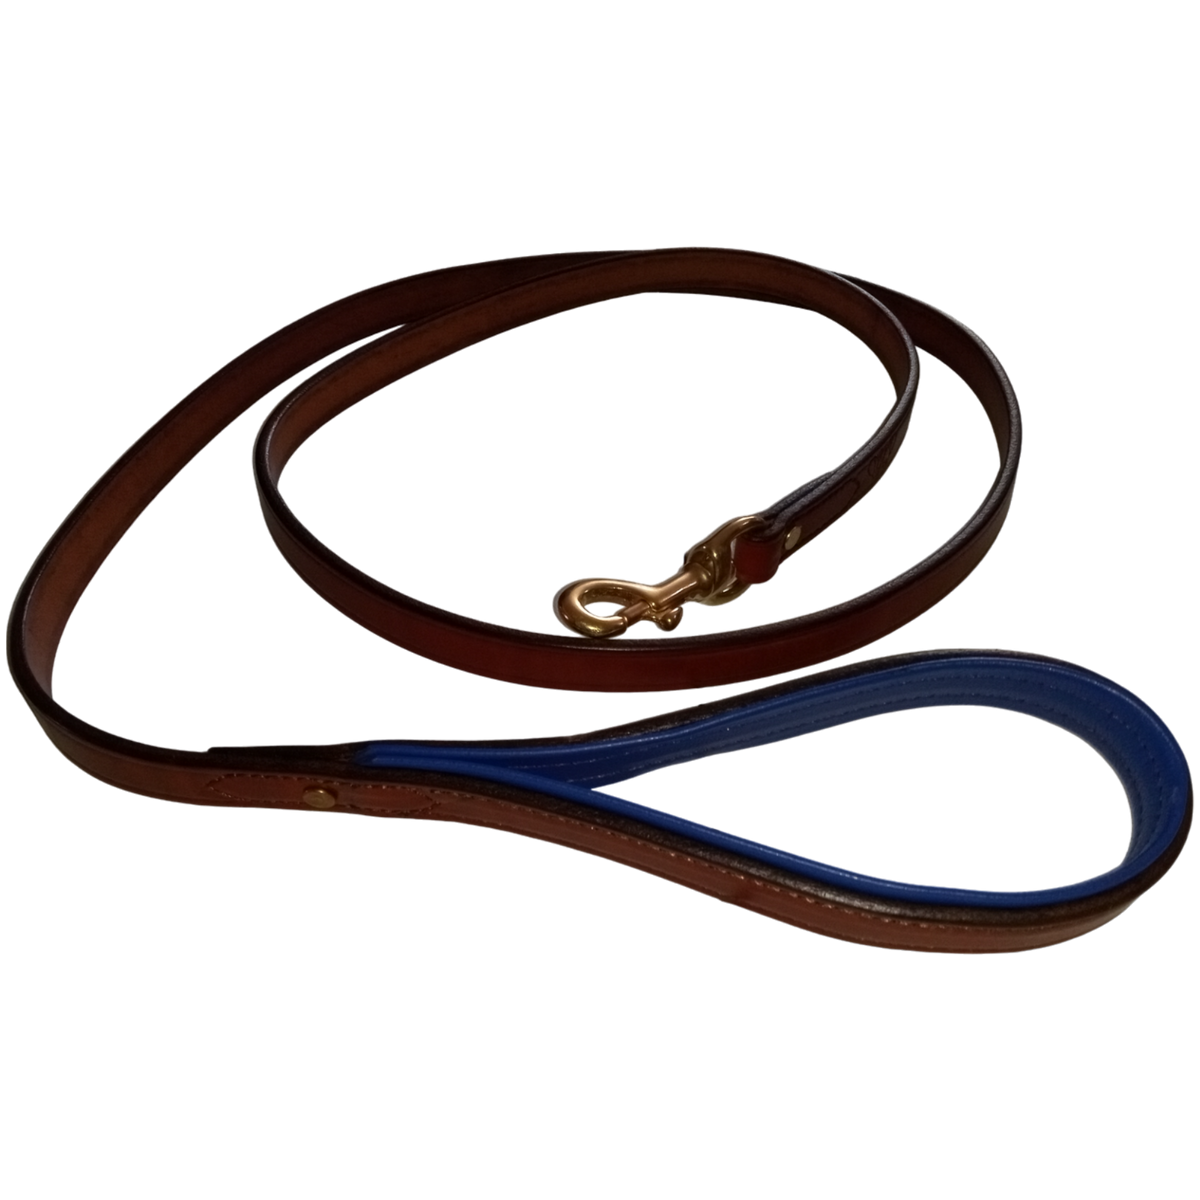 Bridle Leash | Leather Dog Lead | 5 Foot or 6 Foot Lengths | Gift For Dog Person